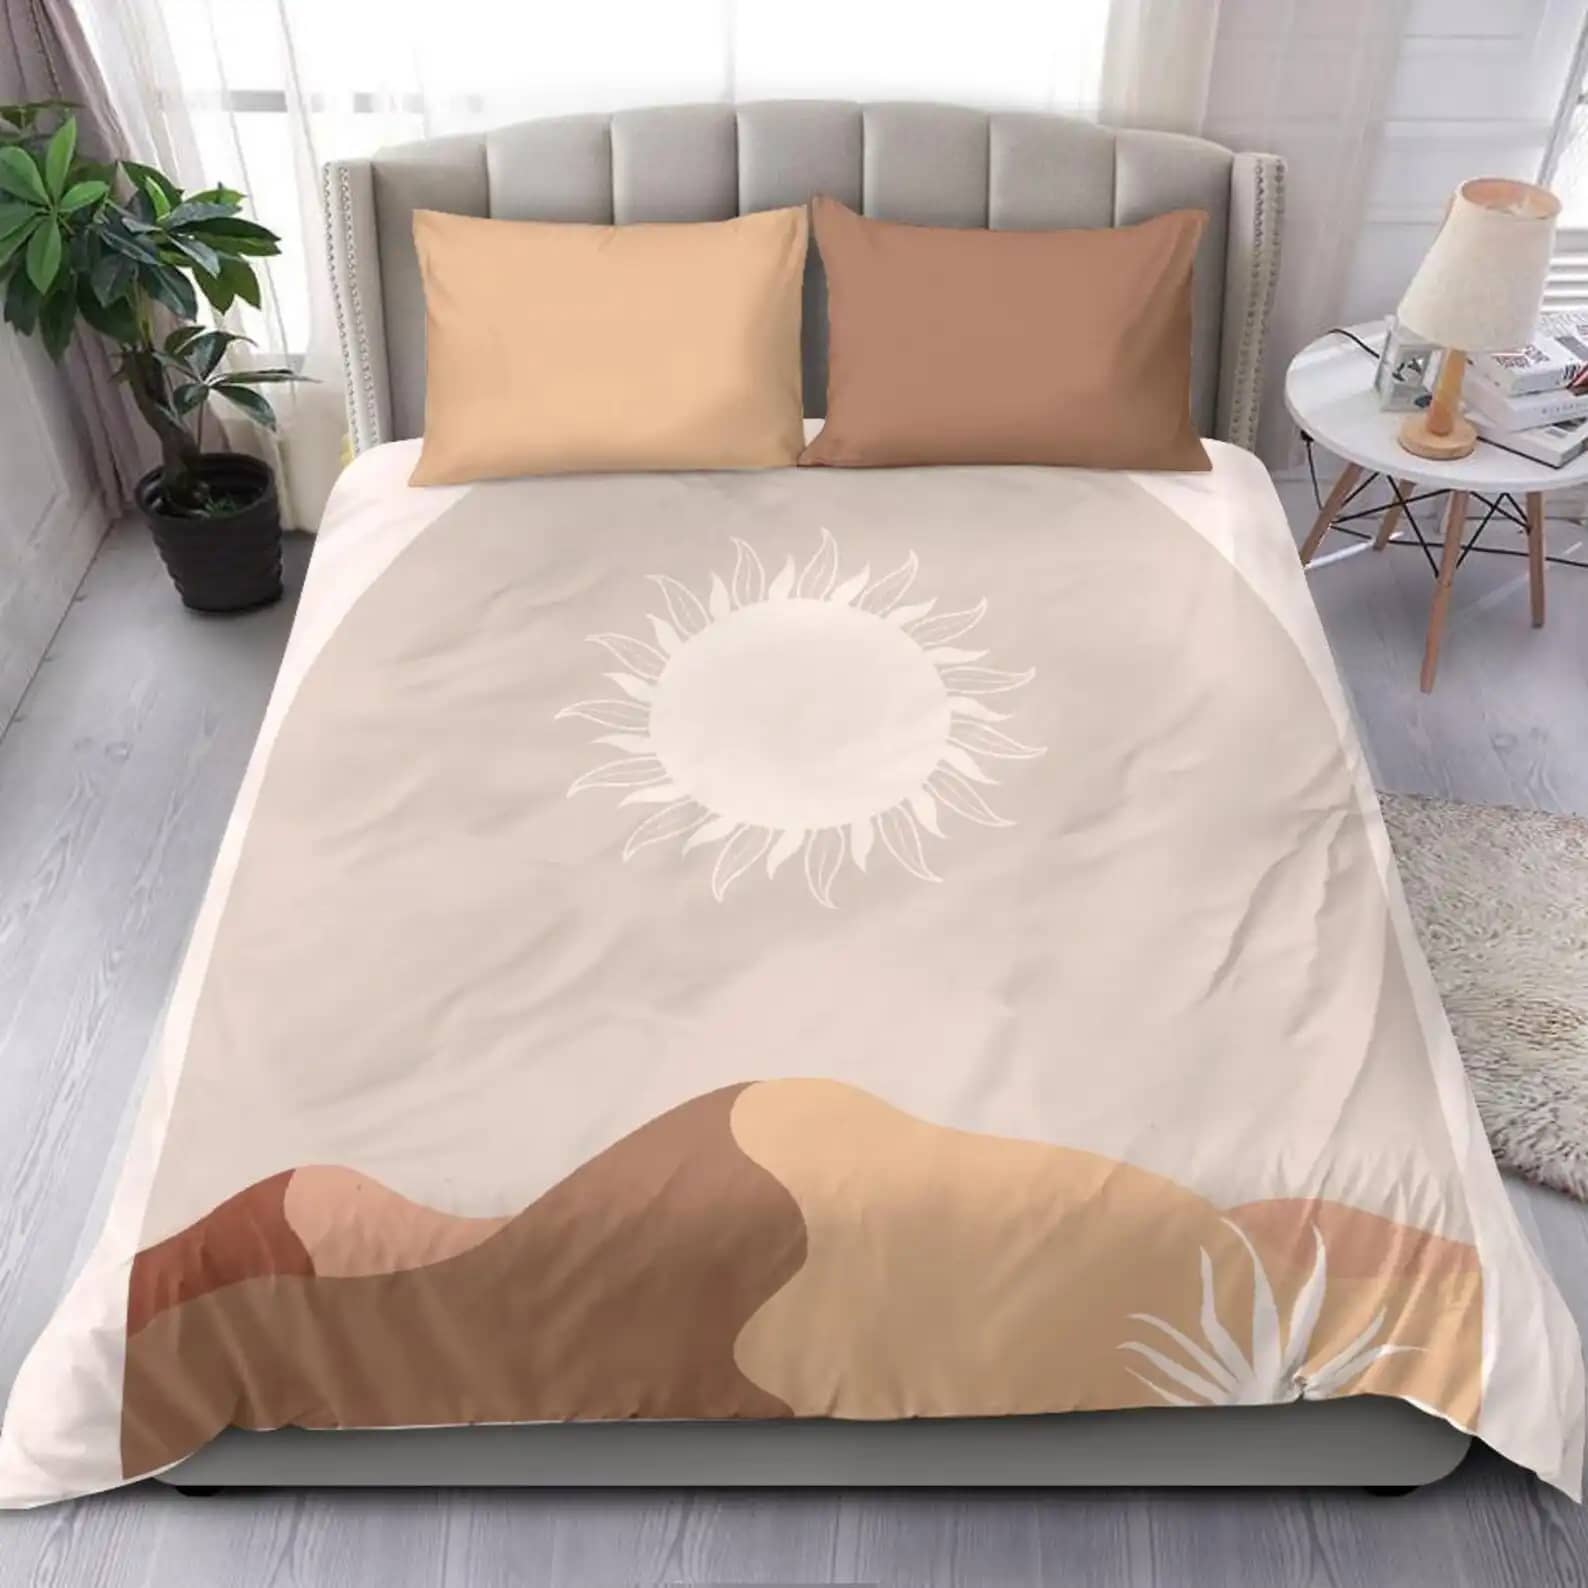 Contemporary Geometric Landscape With Natural Color Like Beige Grey And Brown Quilt Bedding Sets